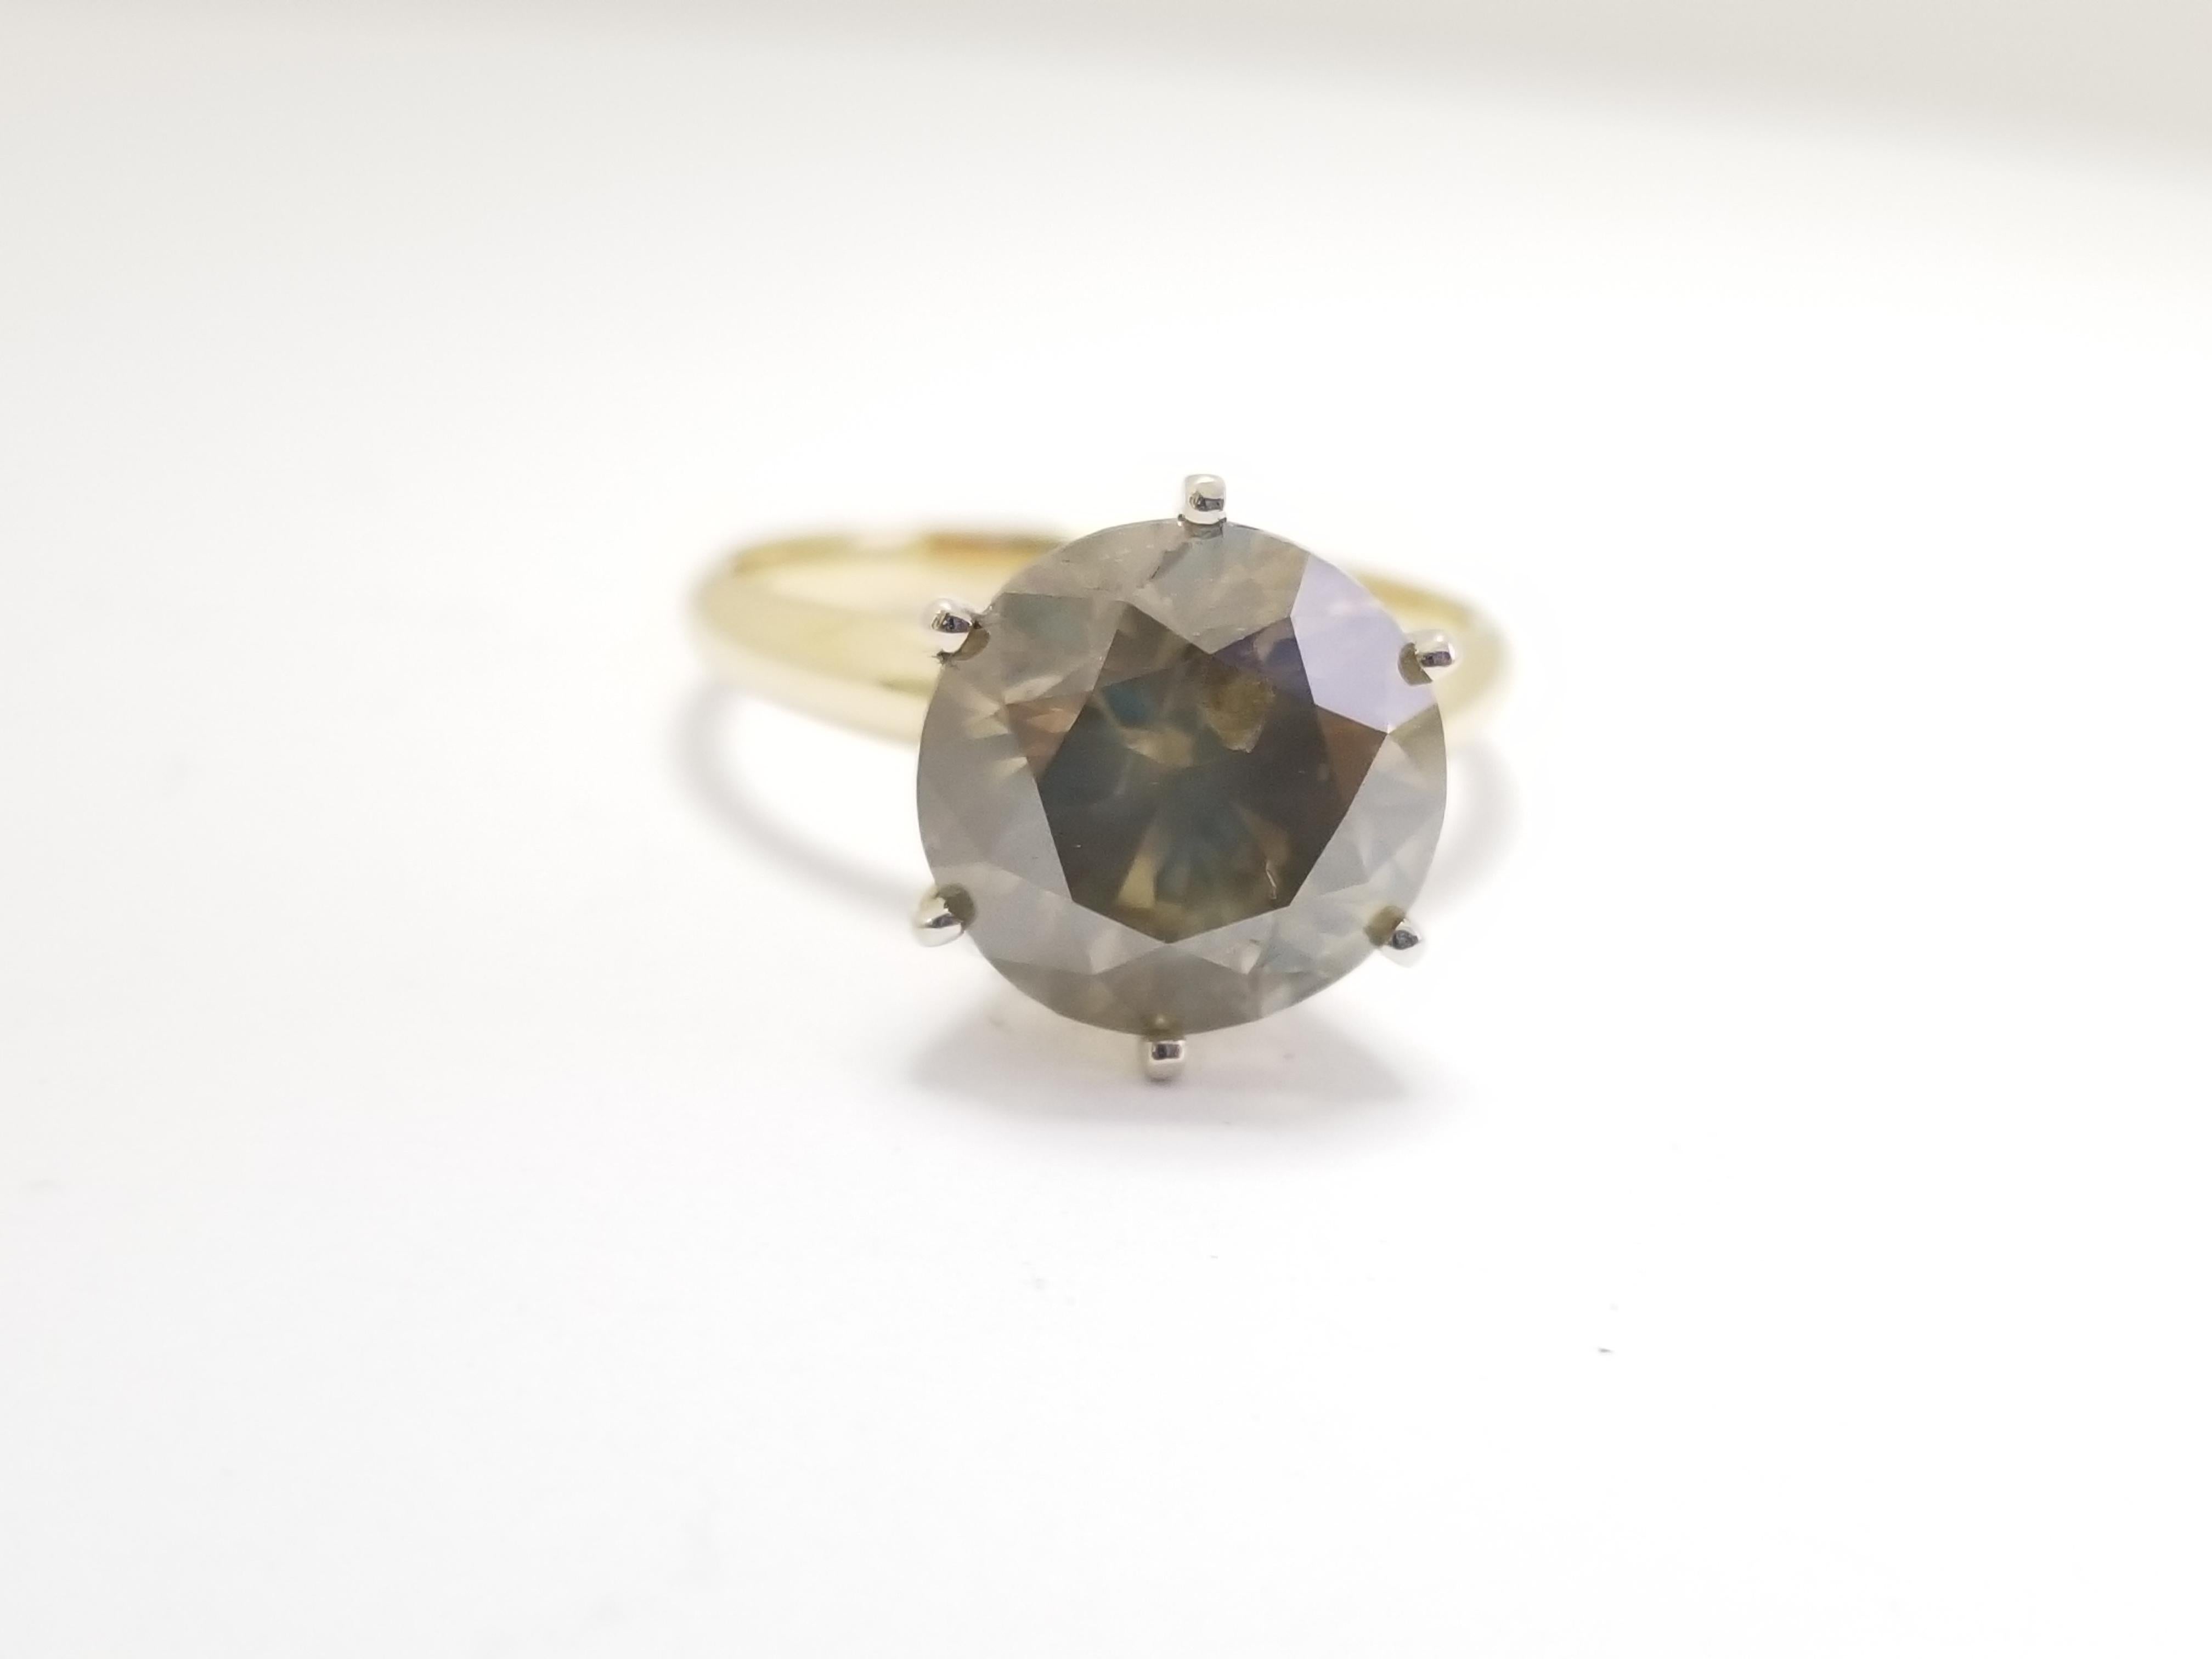 Natural Fancy Brown-Greenish Yellow Round Diamond Ring weighing 5.01 carats. Set on 6-prong 14K solitaire yellow gold. Ring size: 7